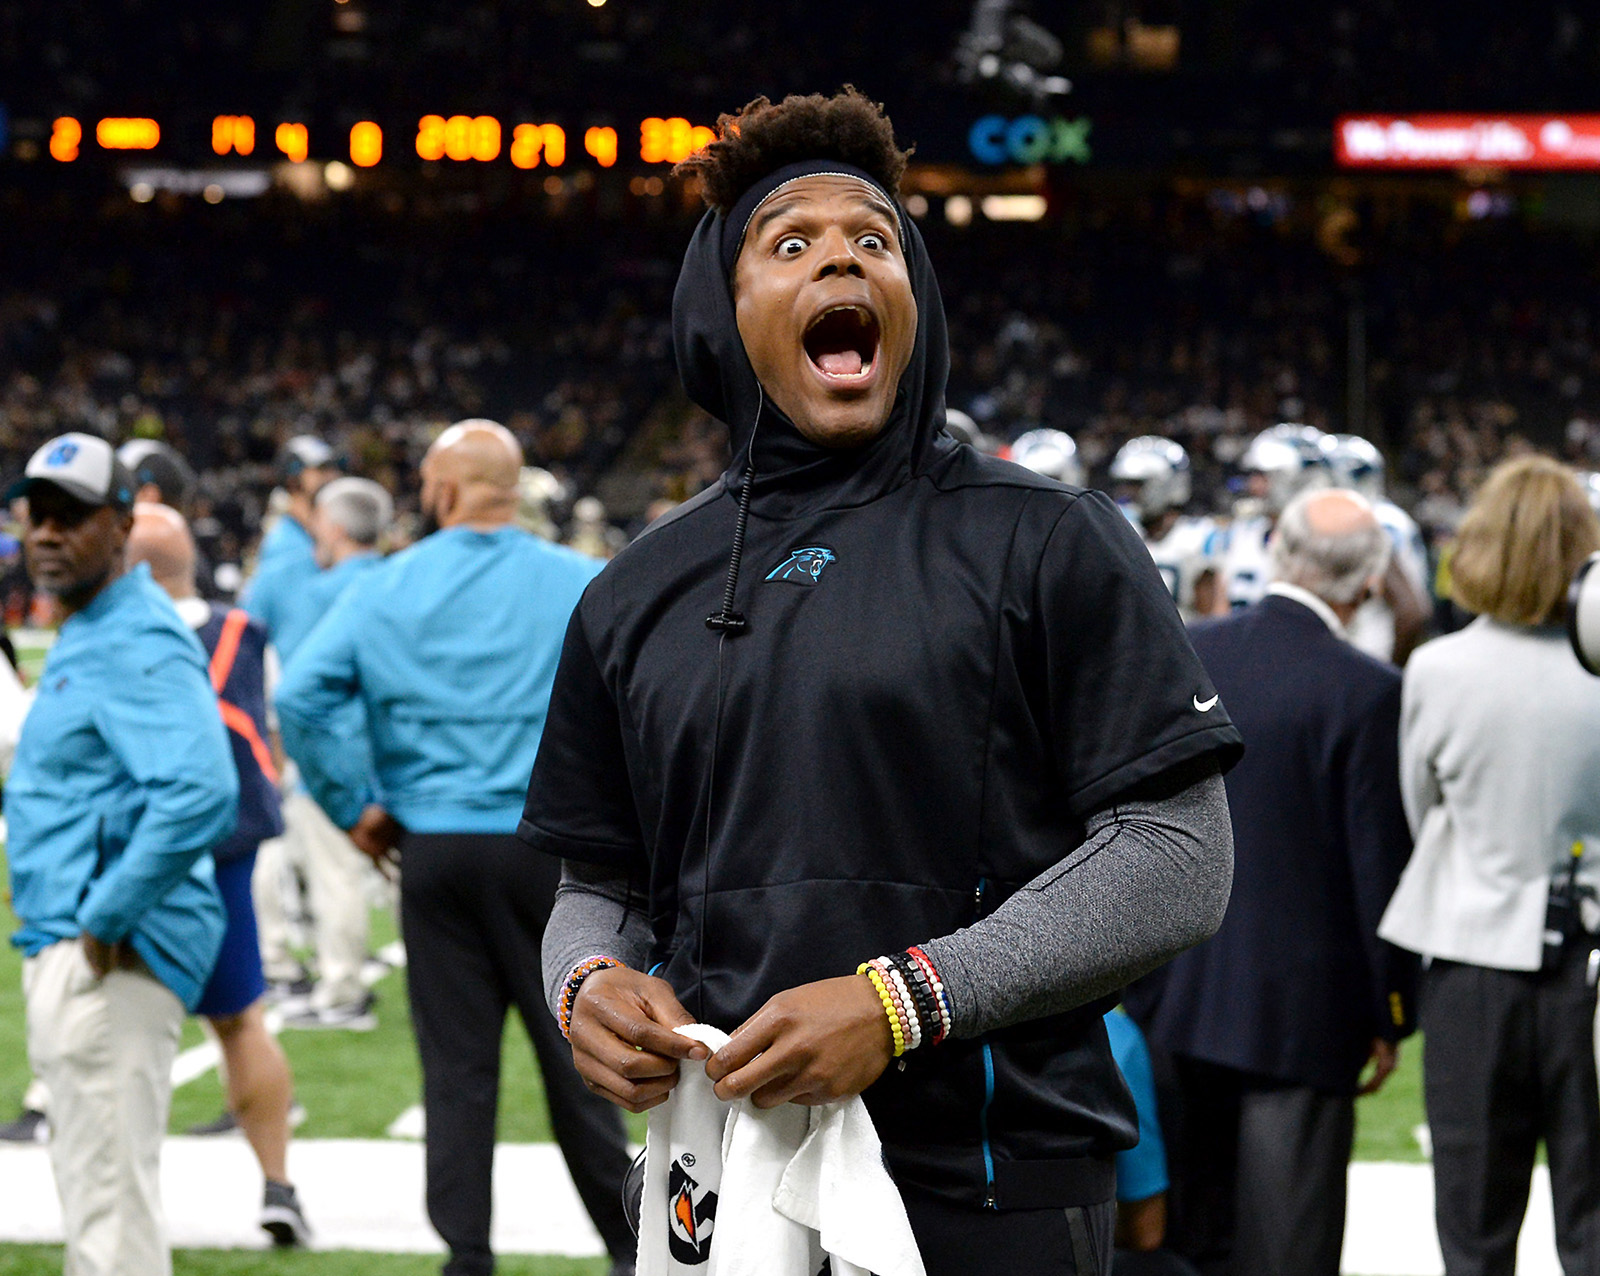 Panthers QB Cam Newton just did something former team owner forbid